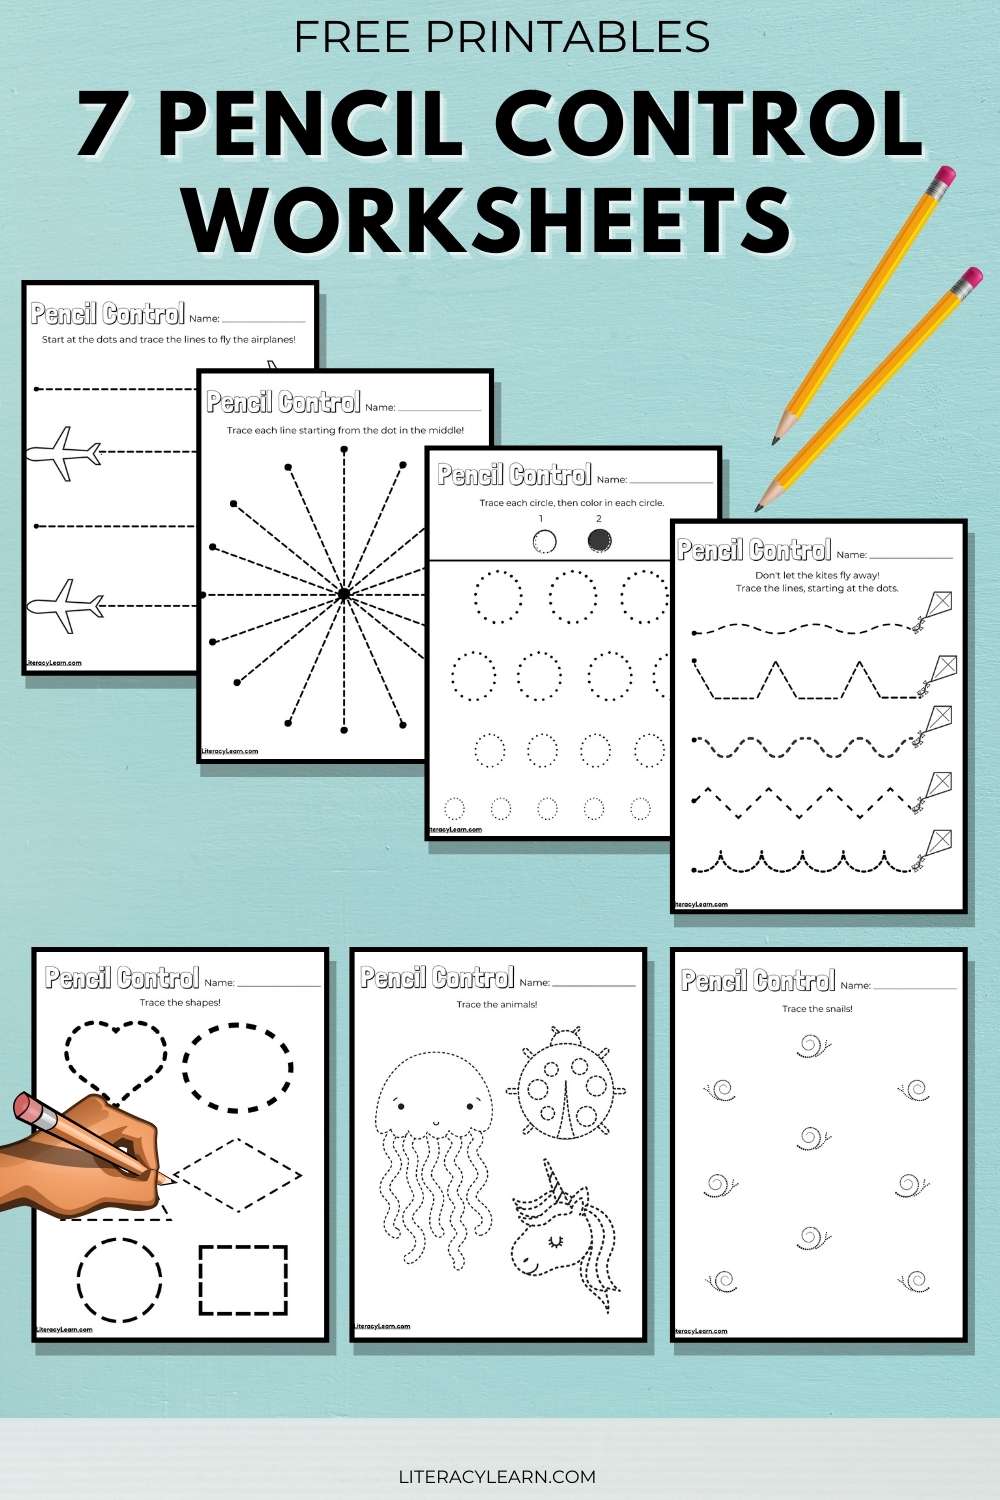 Graphic with large black font that reads "Pencil Control Worksheets" with five worksheets.